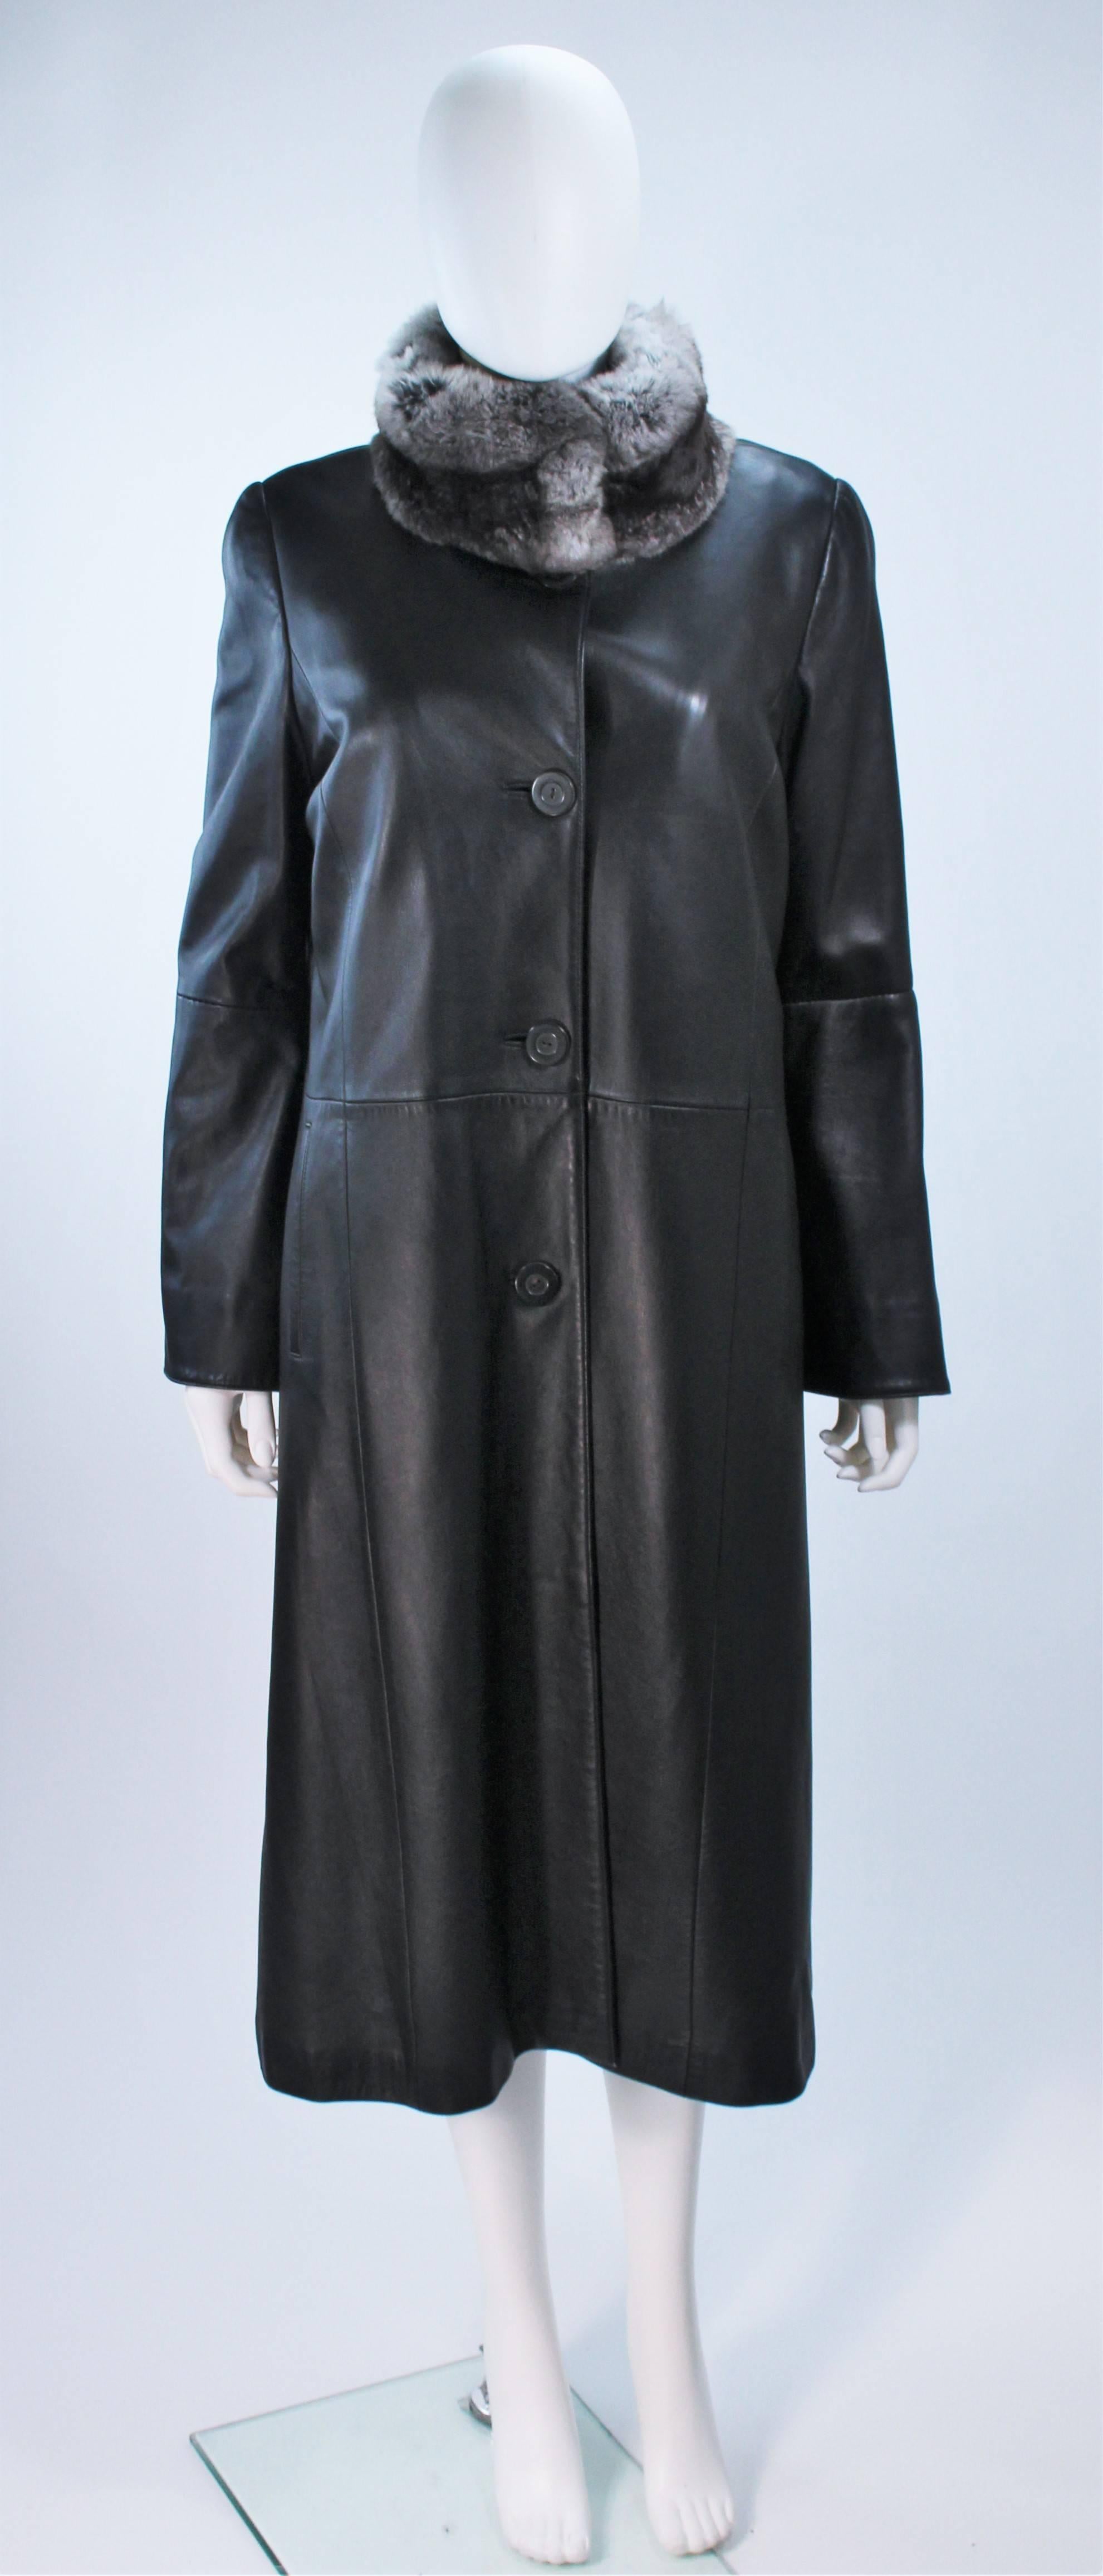  This coat is composed of a beautiful leather with a removable zip around sheared mink lining and Rex rabbit collar. There are side pockets and center front button closures. In great condition, like new. 

  **Please cross-reference measurements